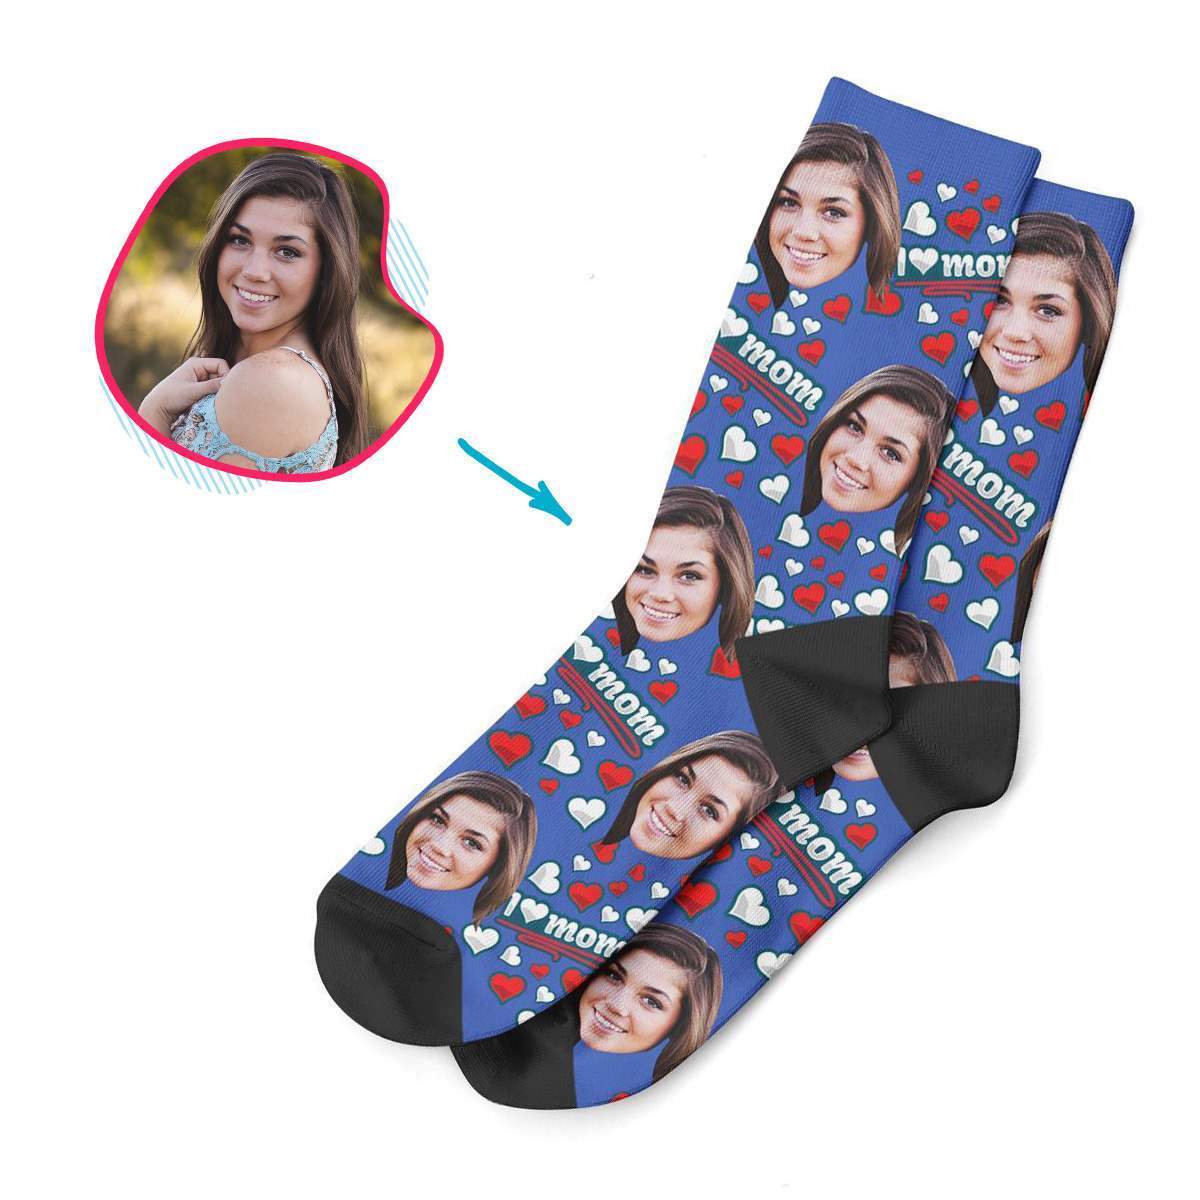 darkblue Love Mom socks personalized with photo of face printed on them